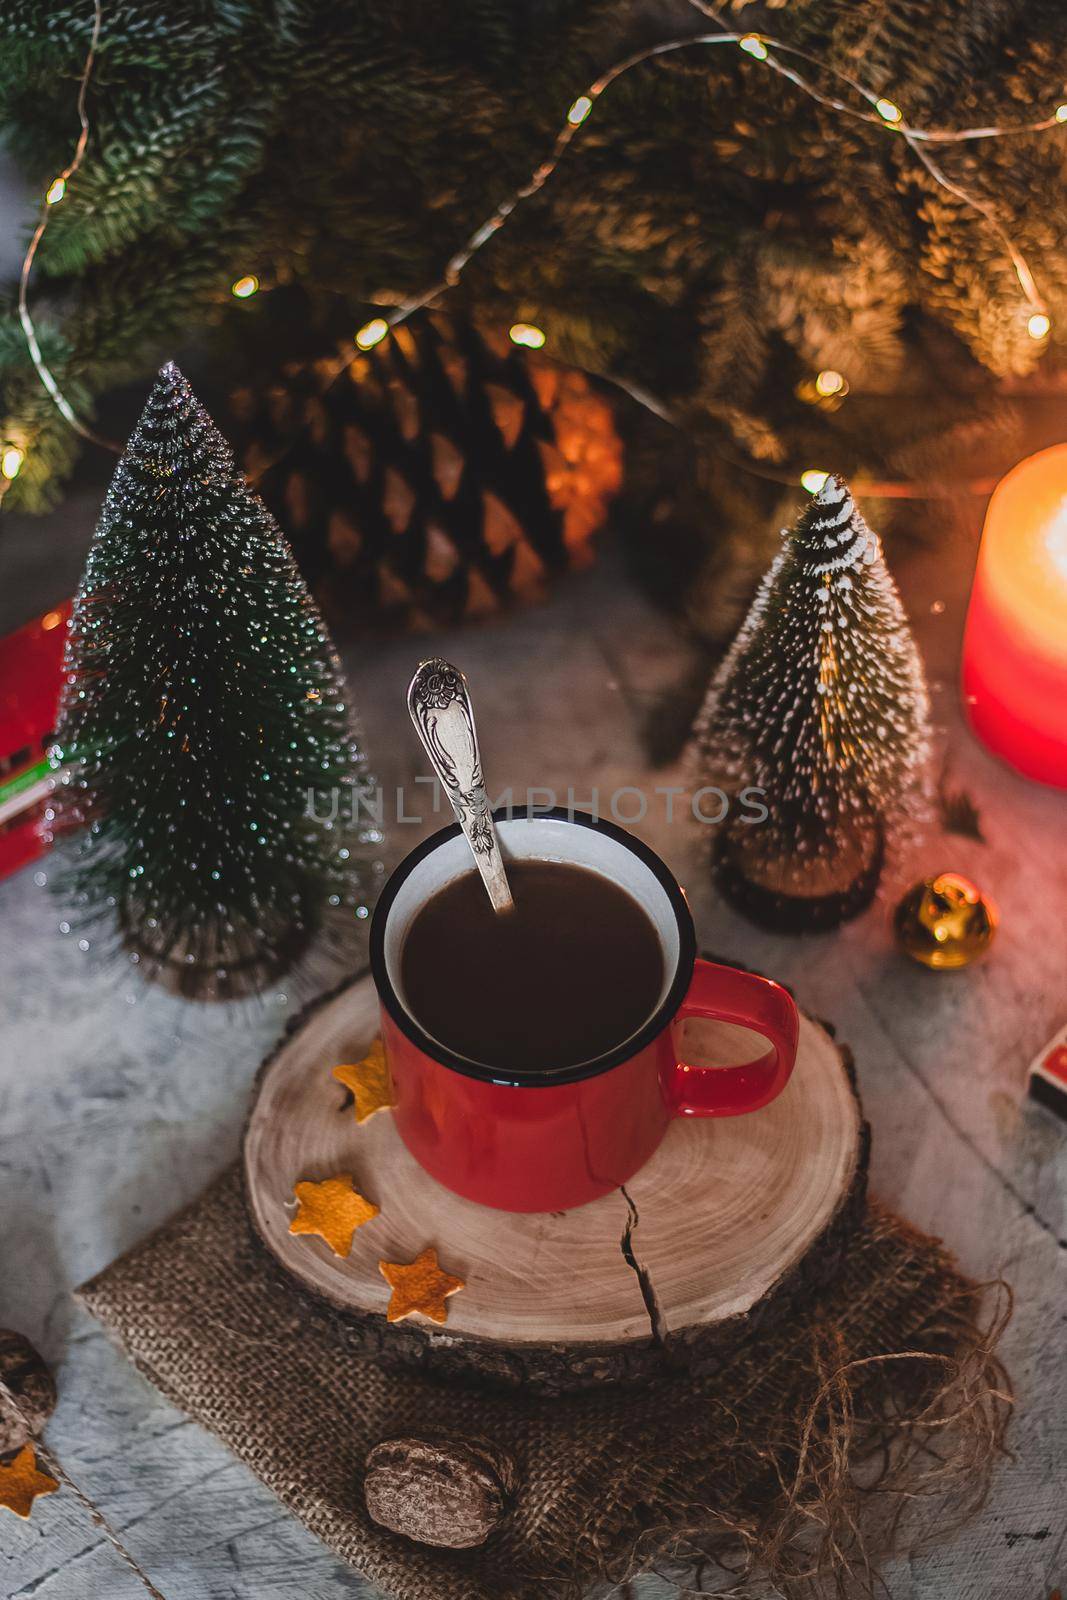 Cozy winter drink hot chocolate cocoa in red mug with fir tree, candles and Christmas lights. by mmp1206